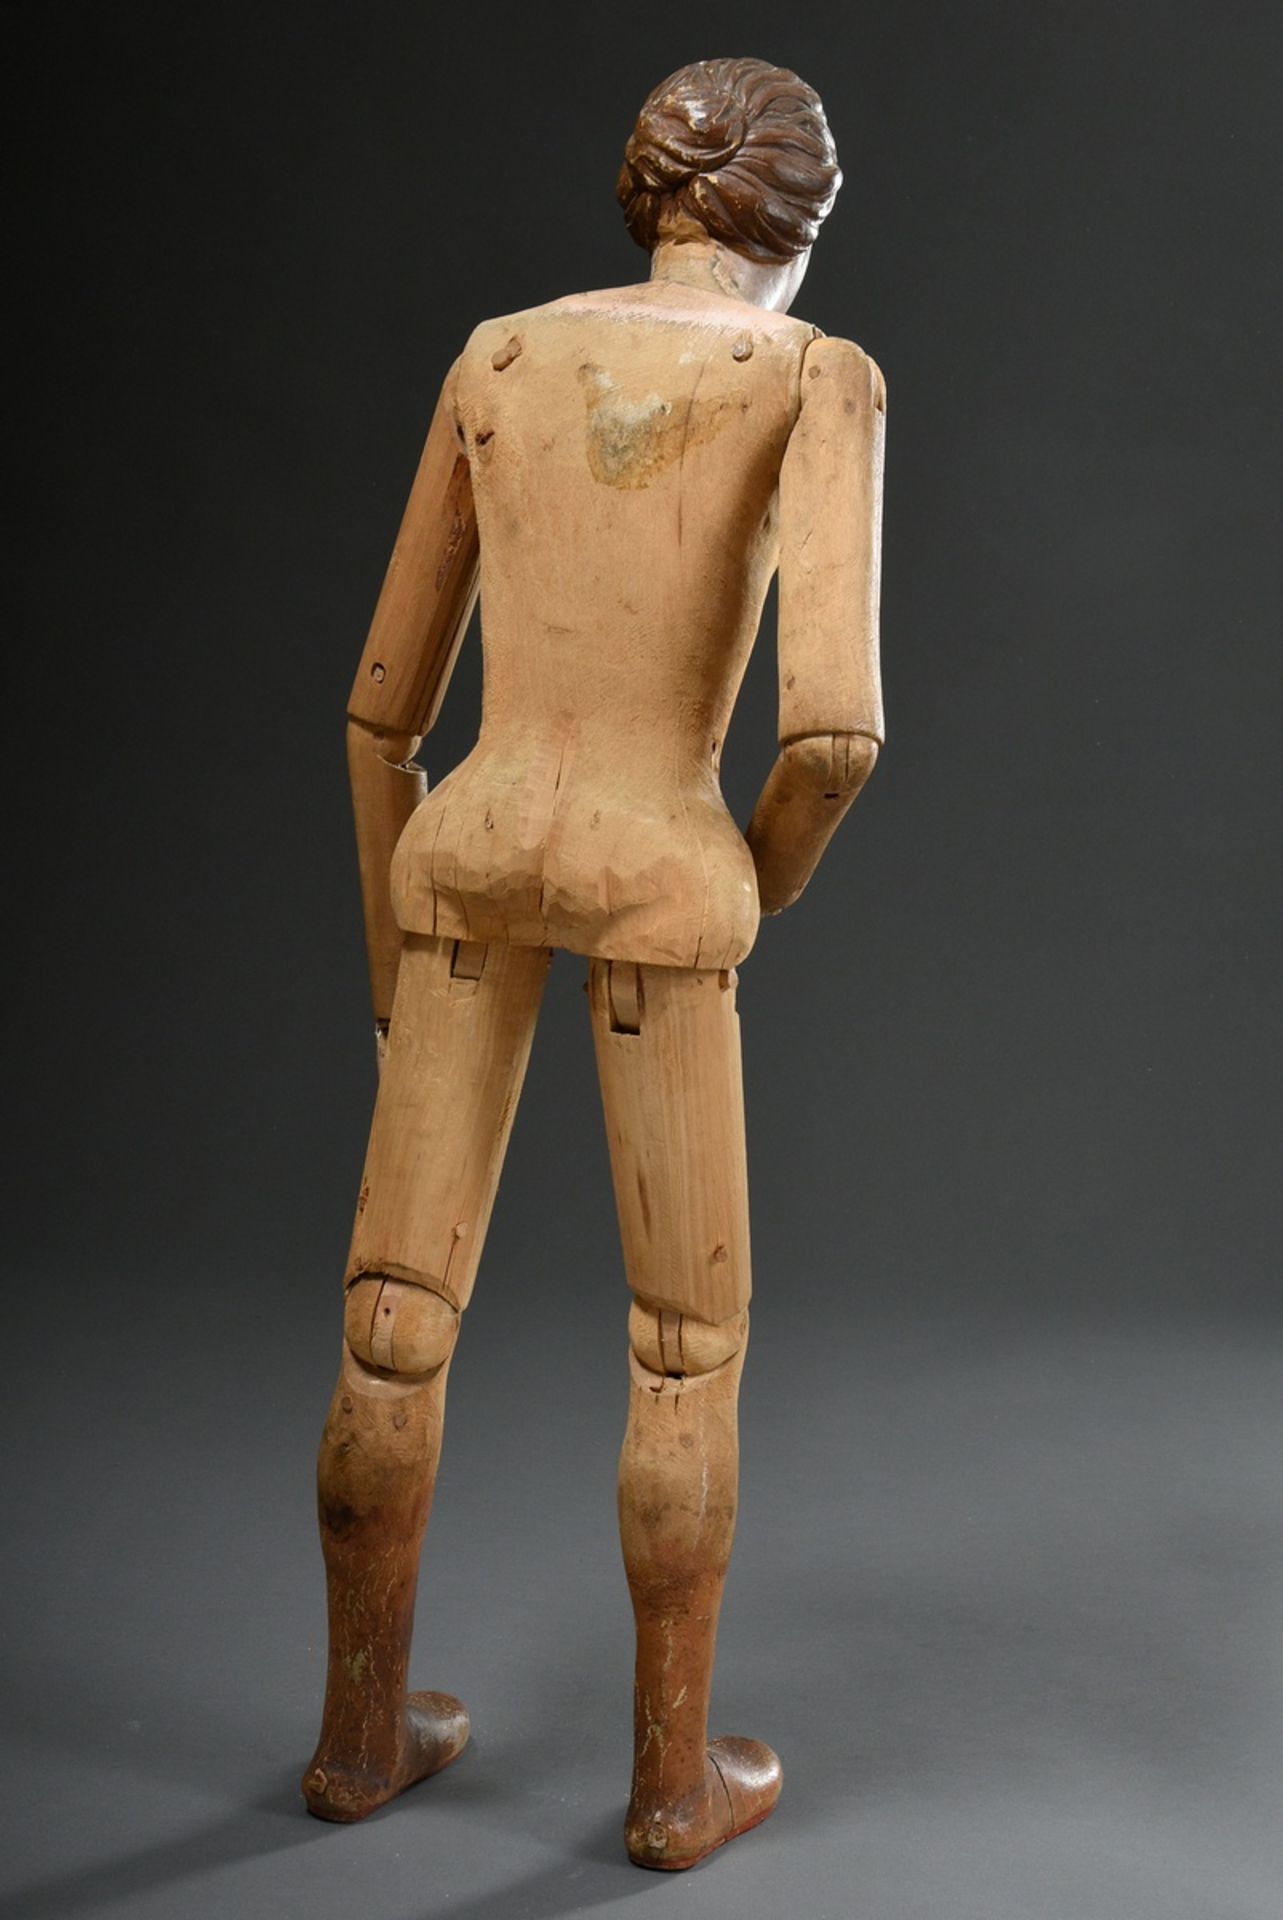 Large processional figure in original clothing with carved wooden body and movable limbs, hands and - Image 7 of 14